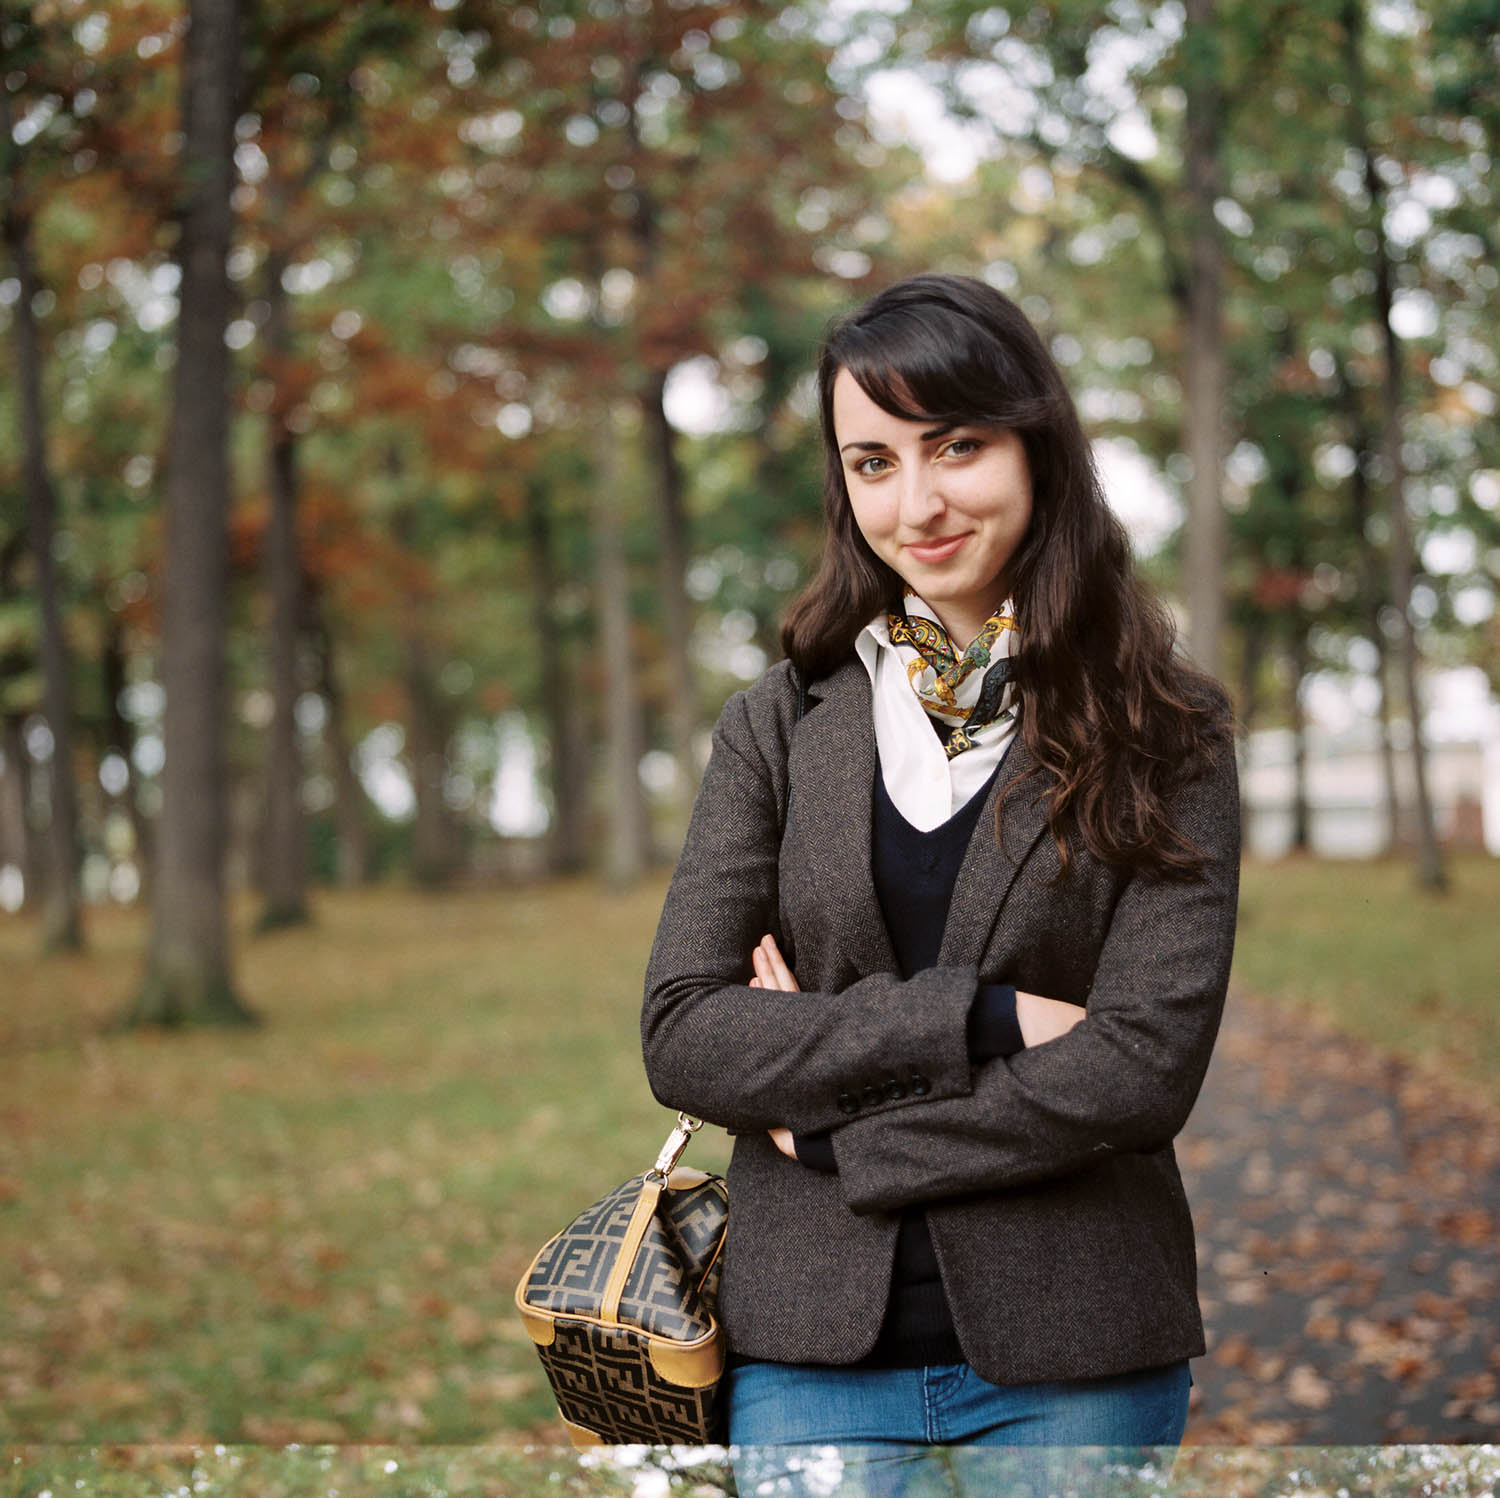 Photograph of a girl in recreation park in autumn